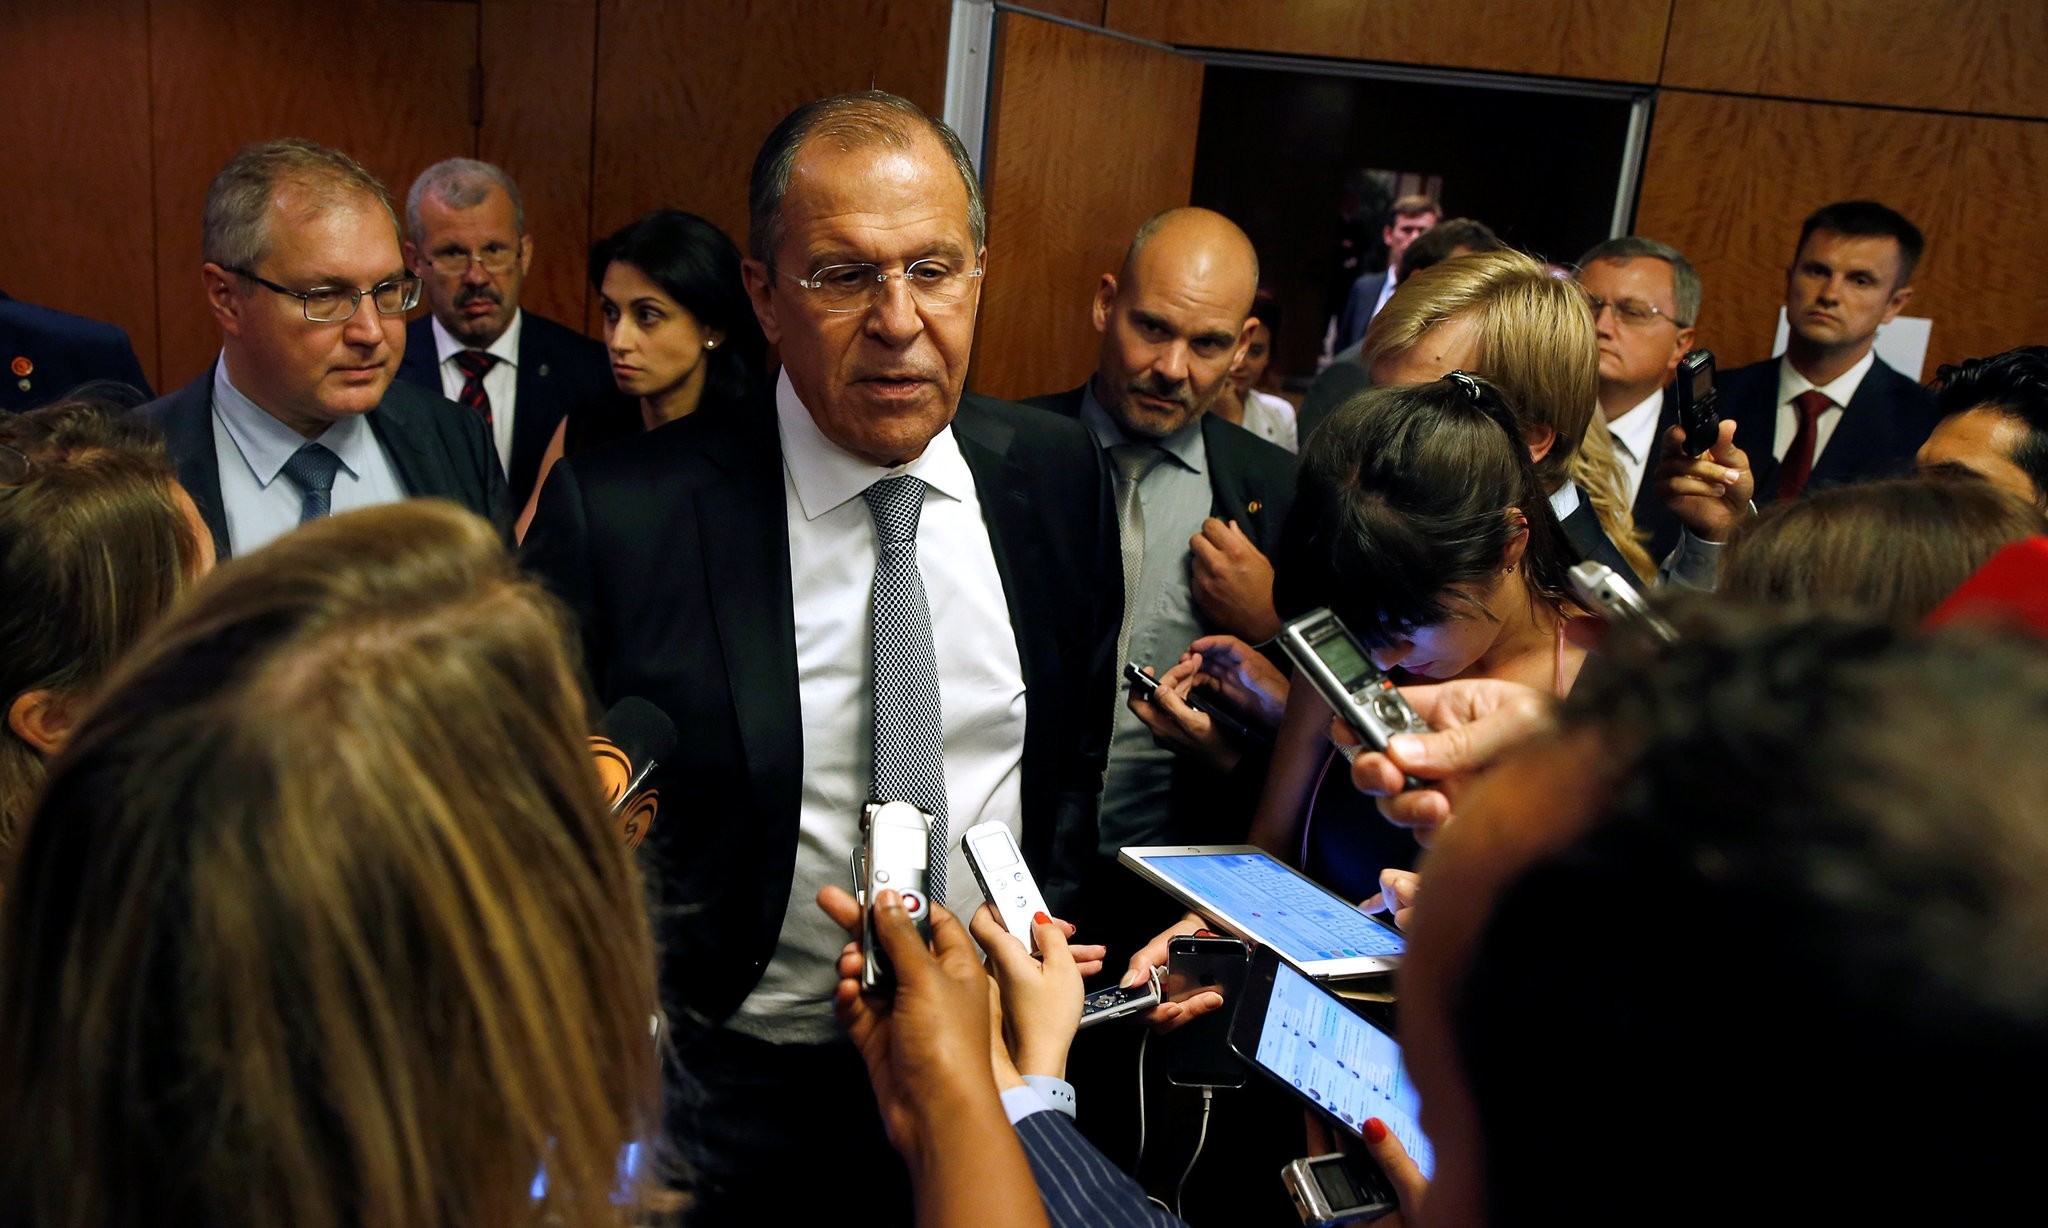 Russian Foreign Minister Sergei Lavrov speaks to reporters during a break in his meeting with U.S. Secretary of State John Kerry in Geneva, Switzerland . (Reuters Photo)